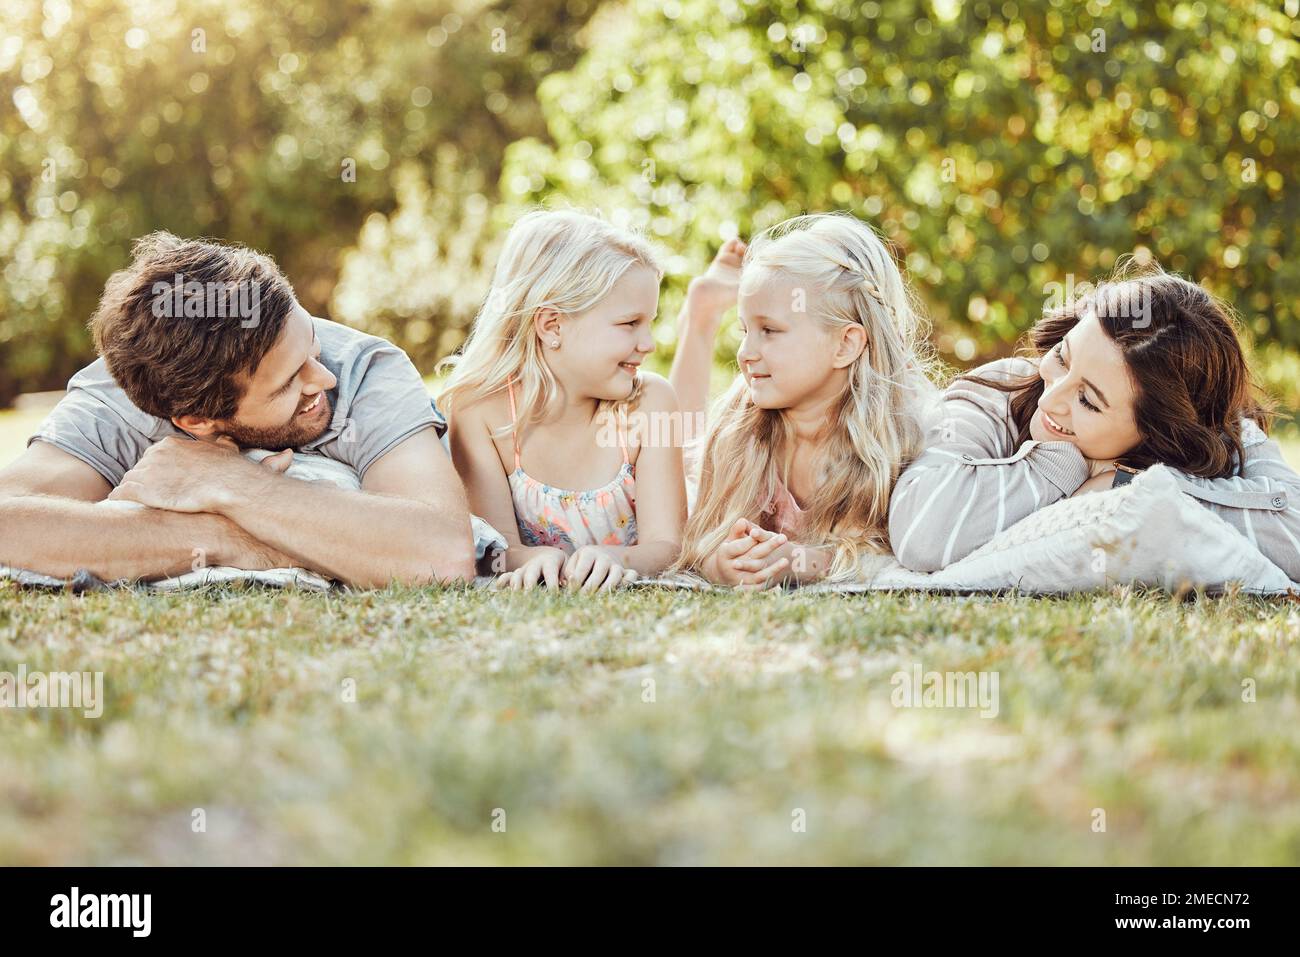 Family, parents and children lying on grass, park and garden in sunshine together. Kids, mom and dad smile on lawn for love, fun and care in nature Stock Photo